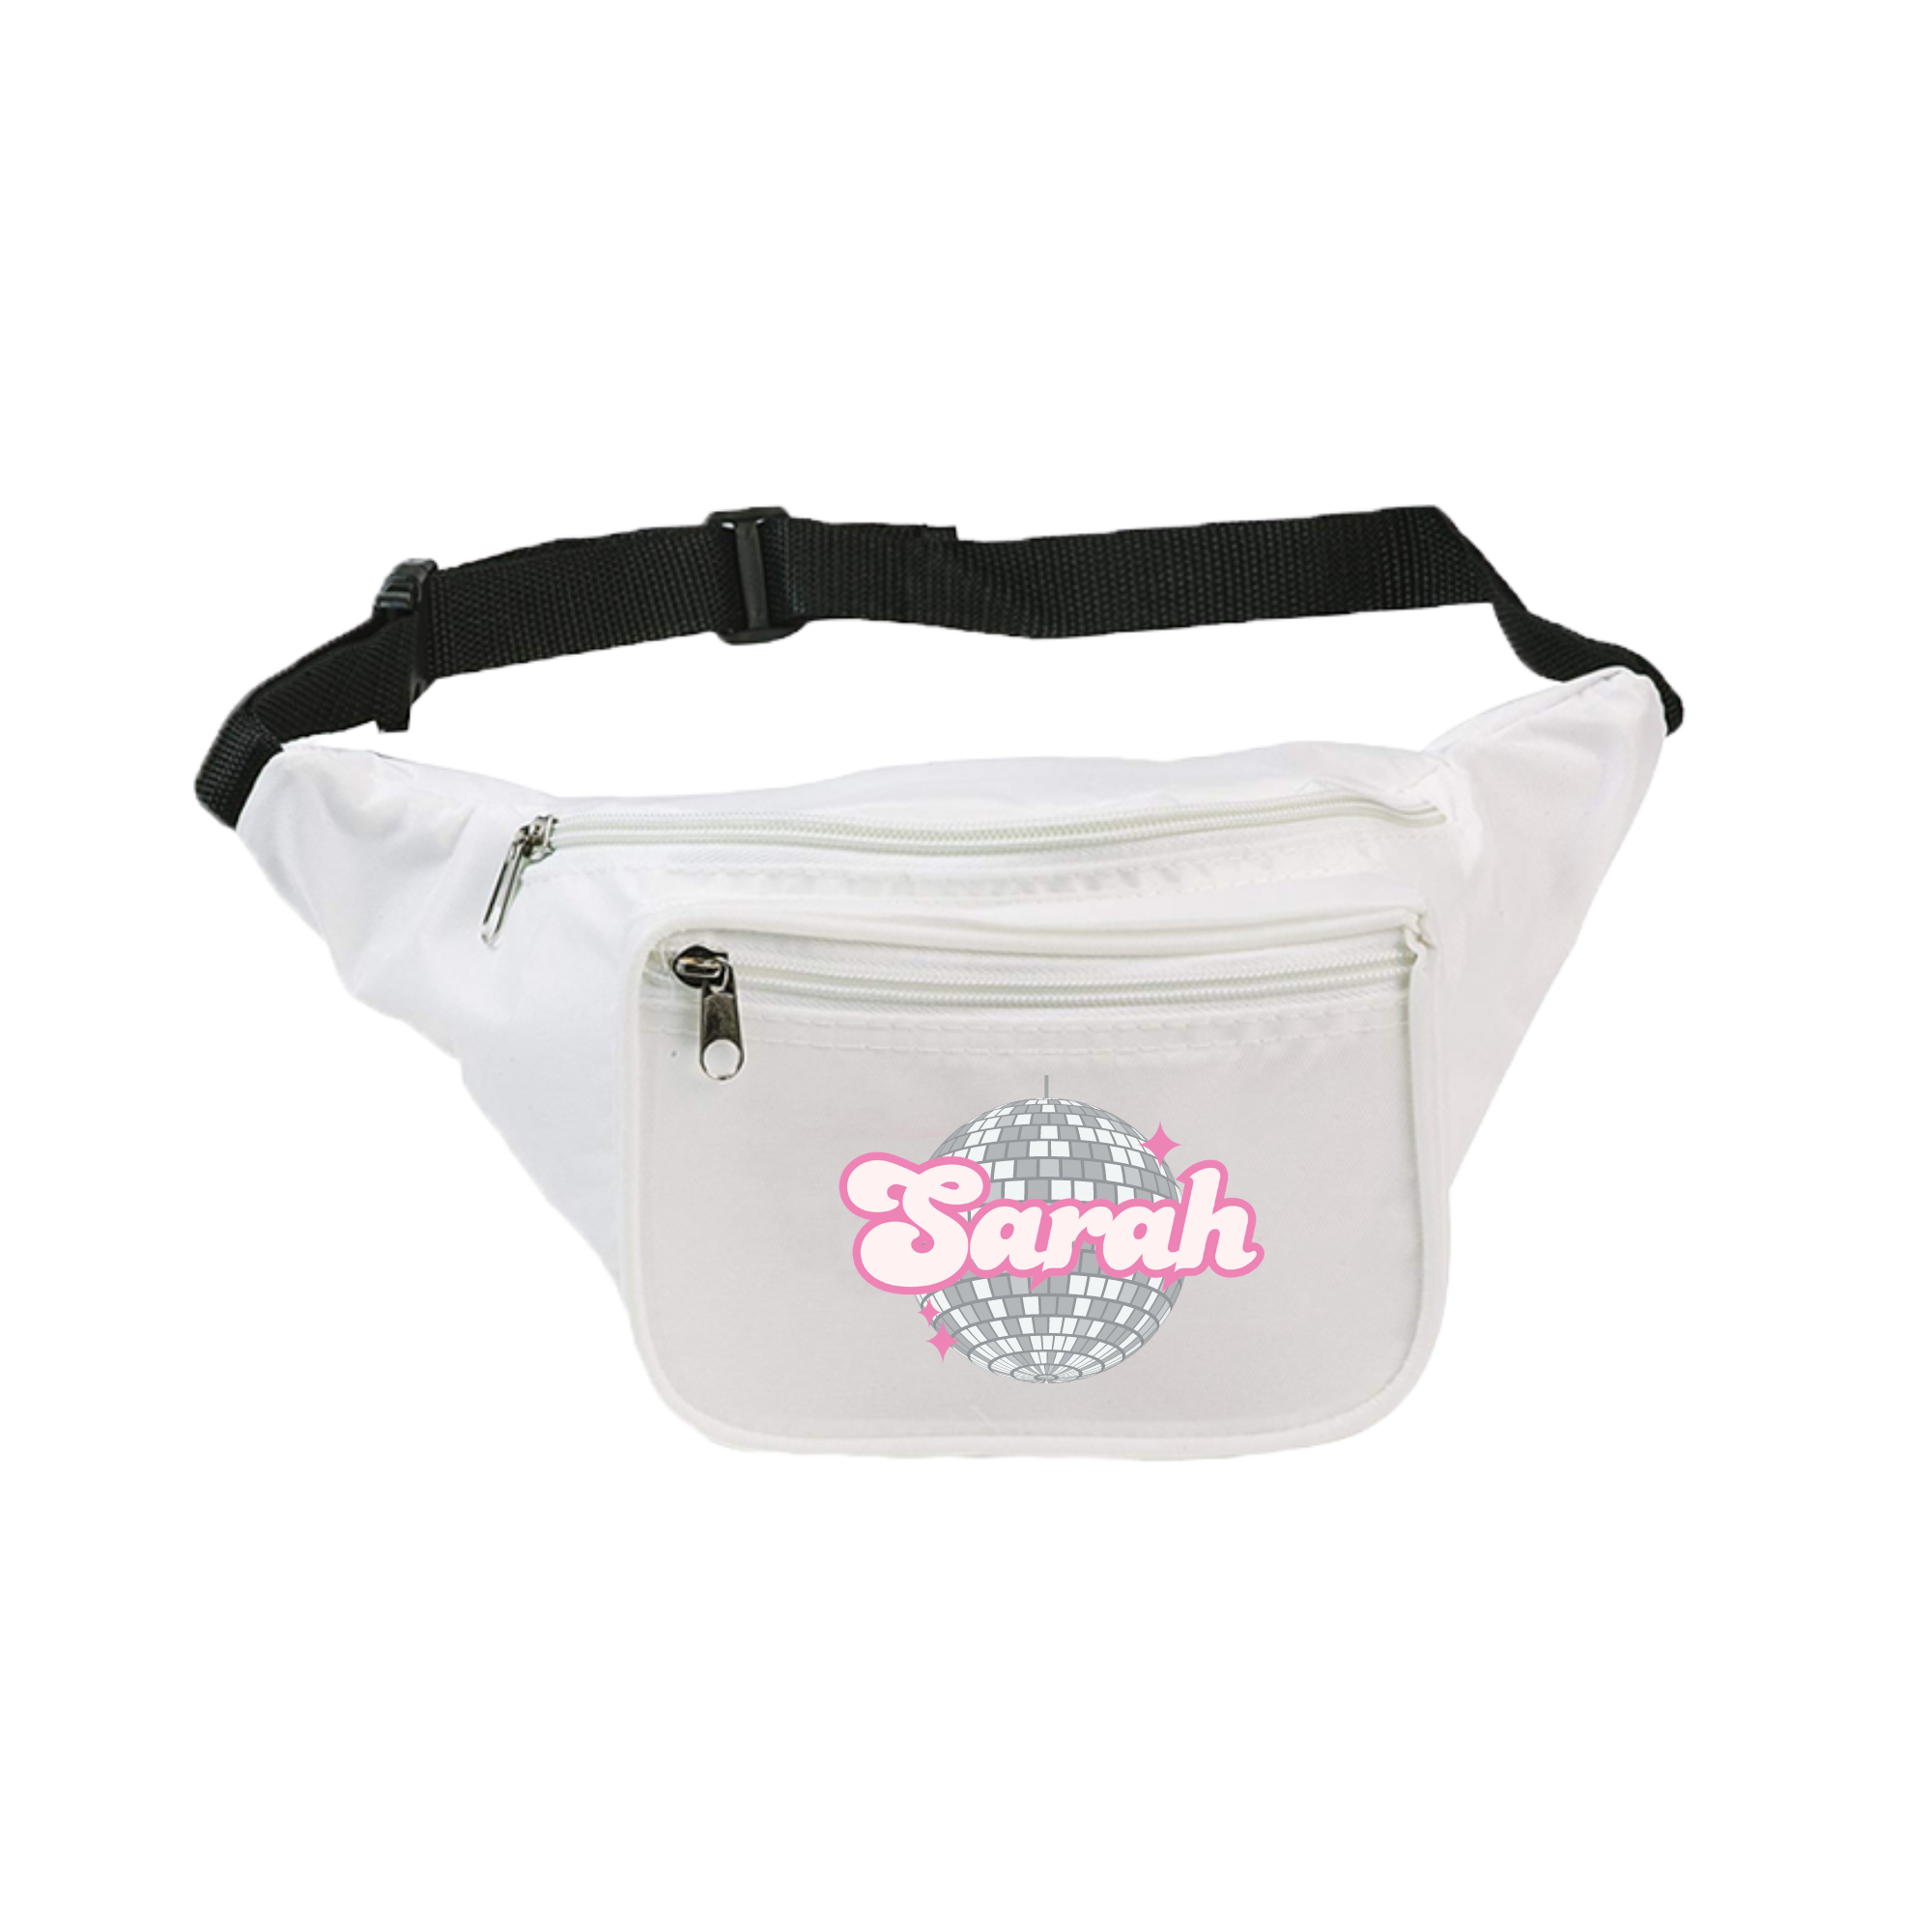 A white fanny pack is customized with a disco ball design and a custom name 